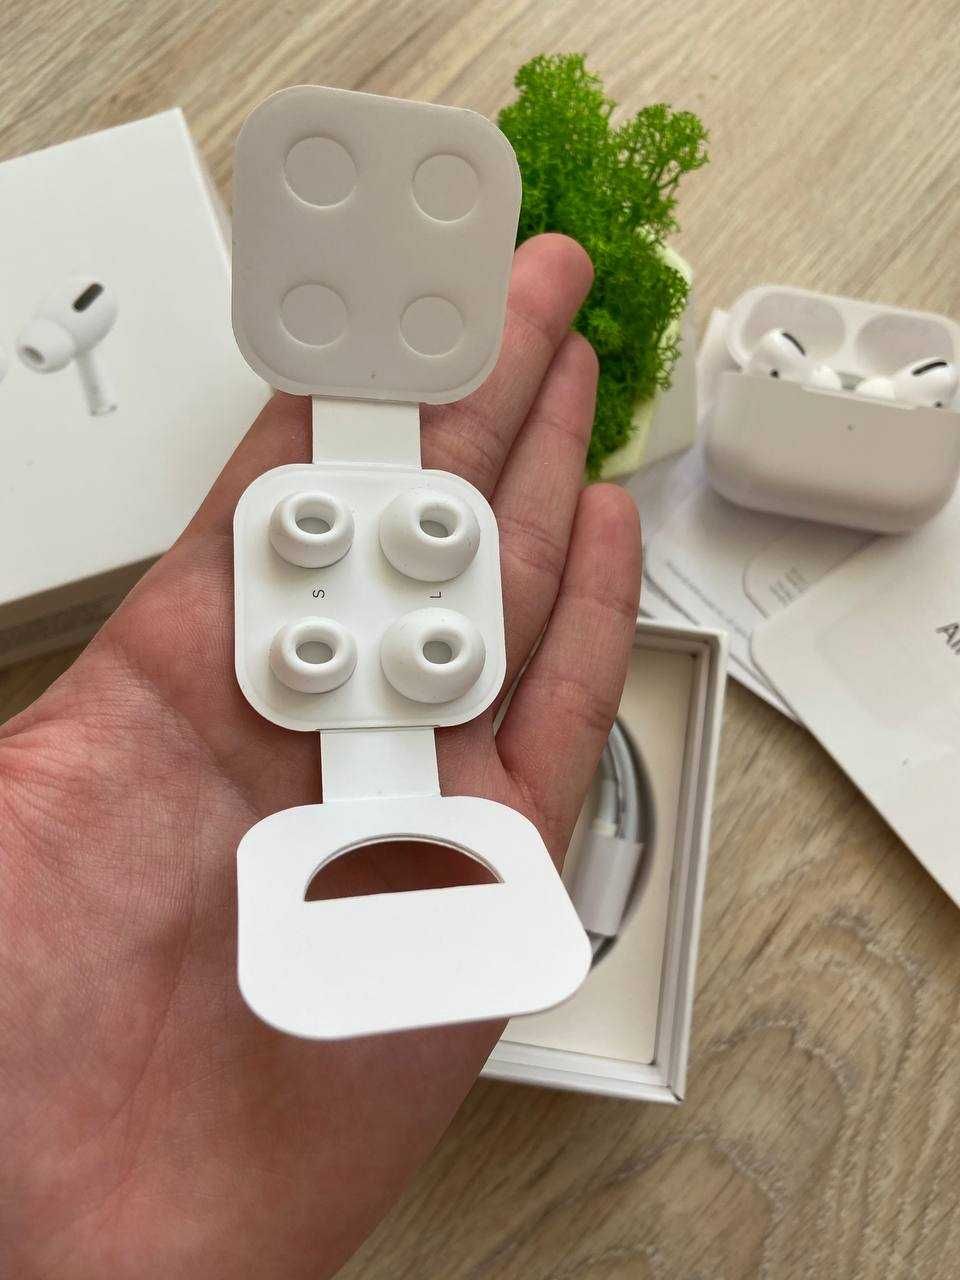 AirPods PRO LUX version